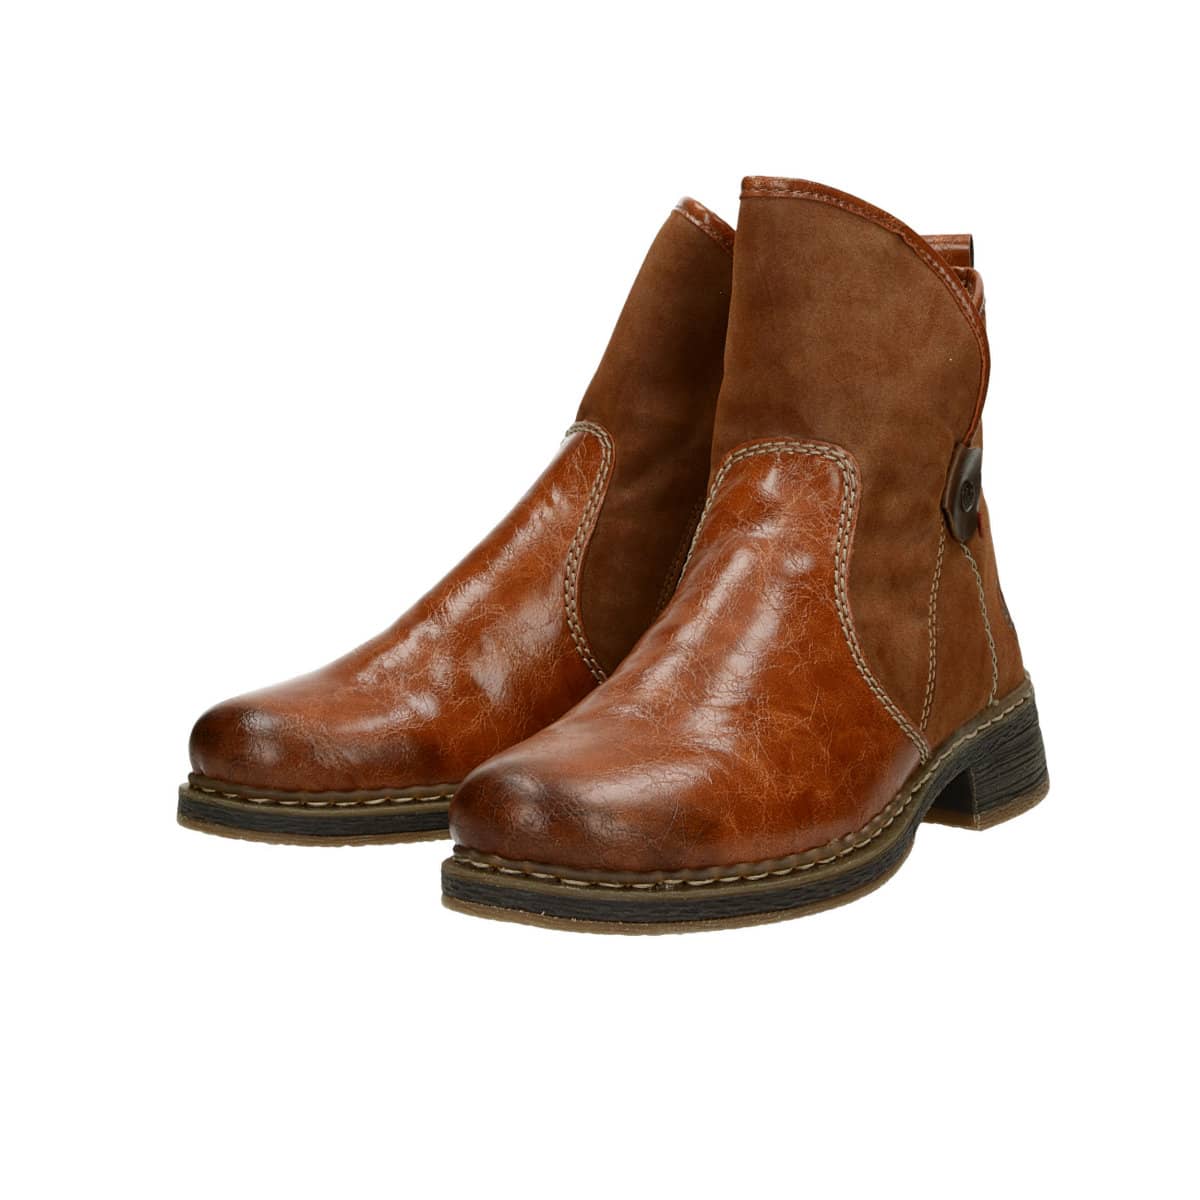 Rieker women´s ankle boots - brown | Robel.shoes